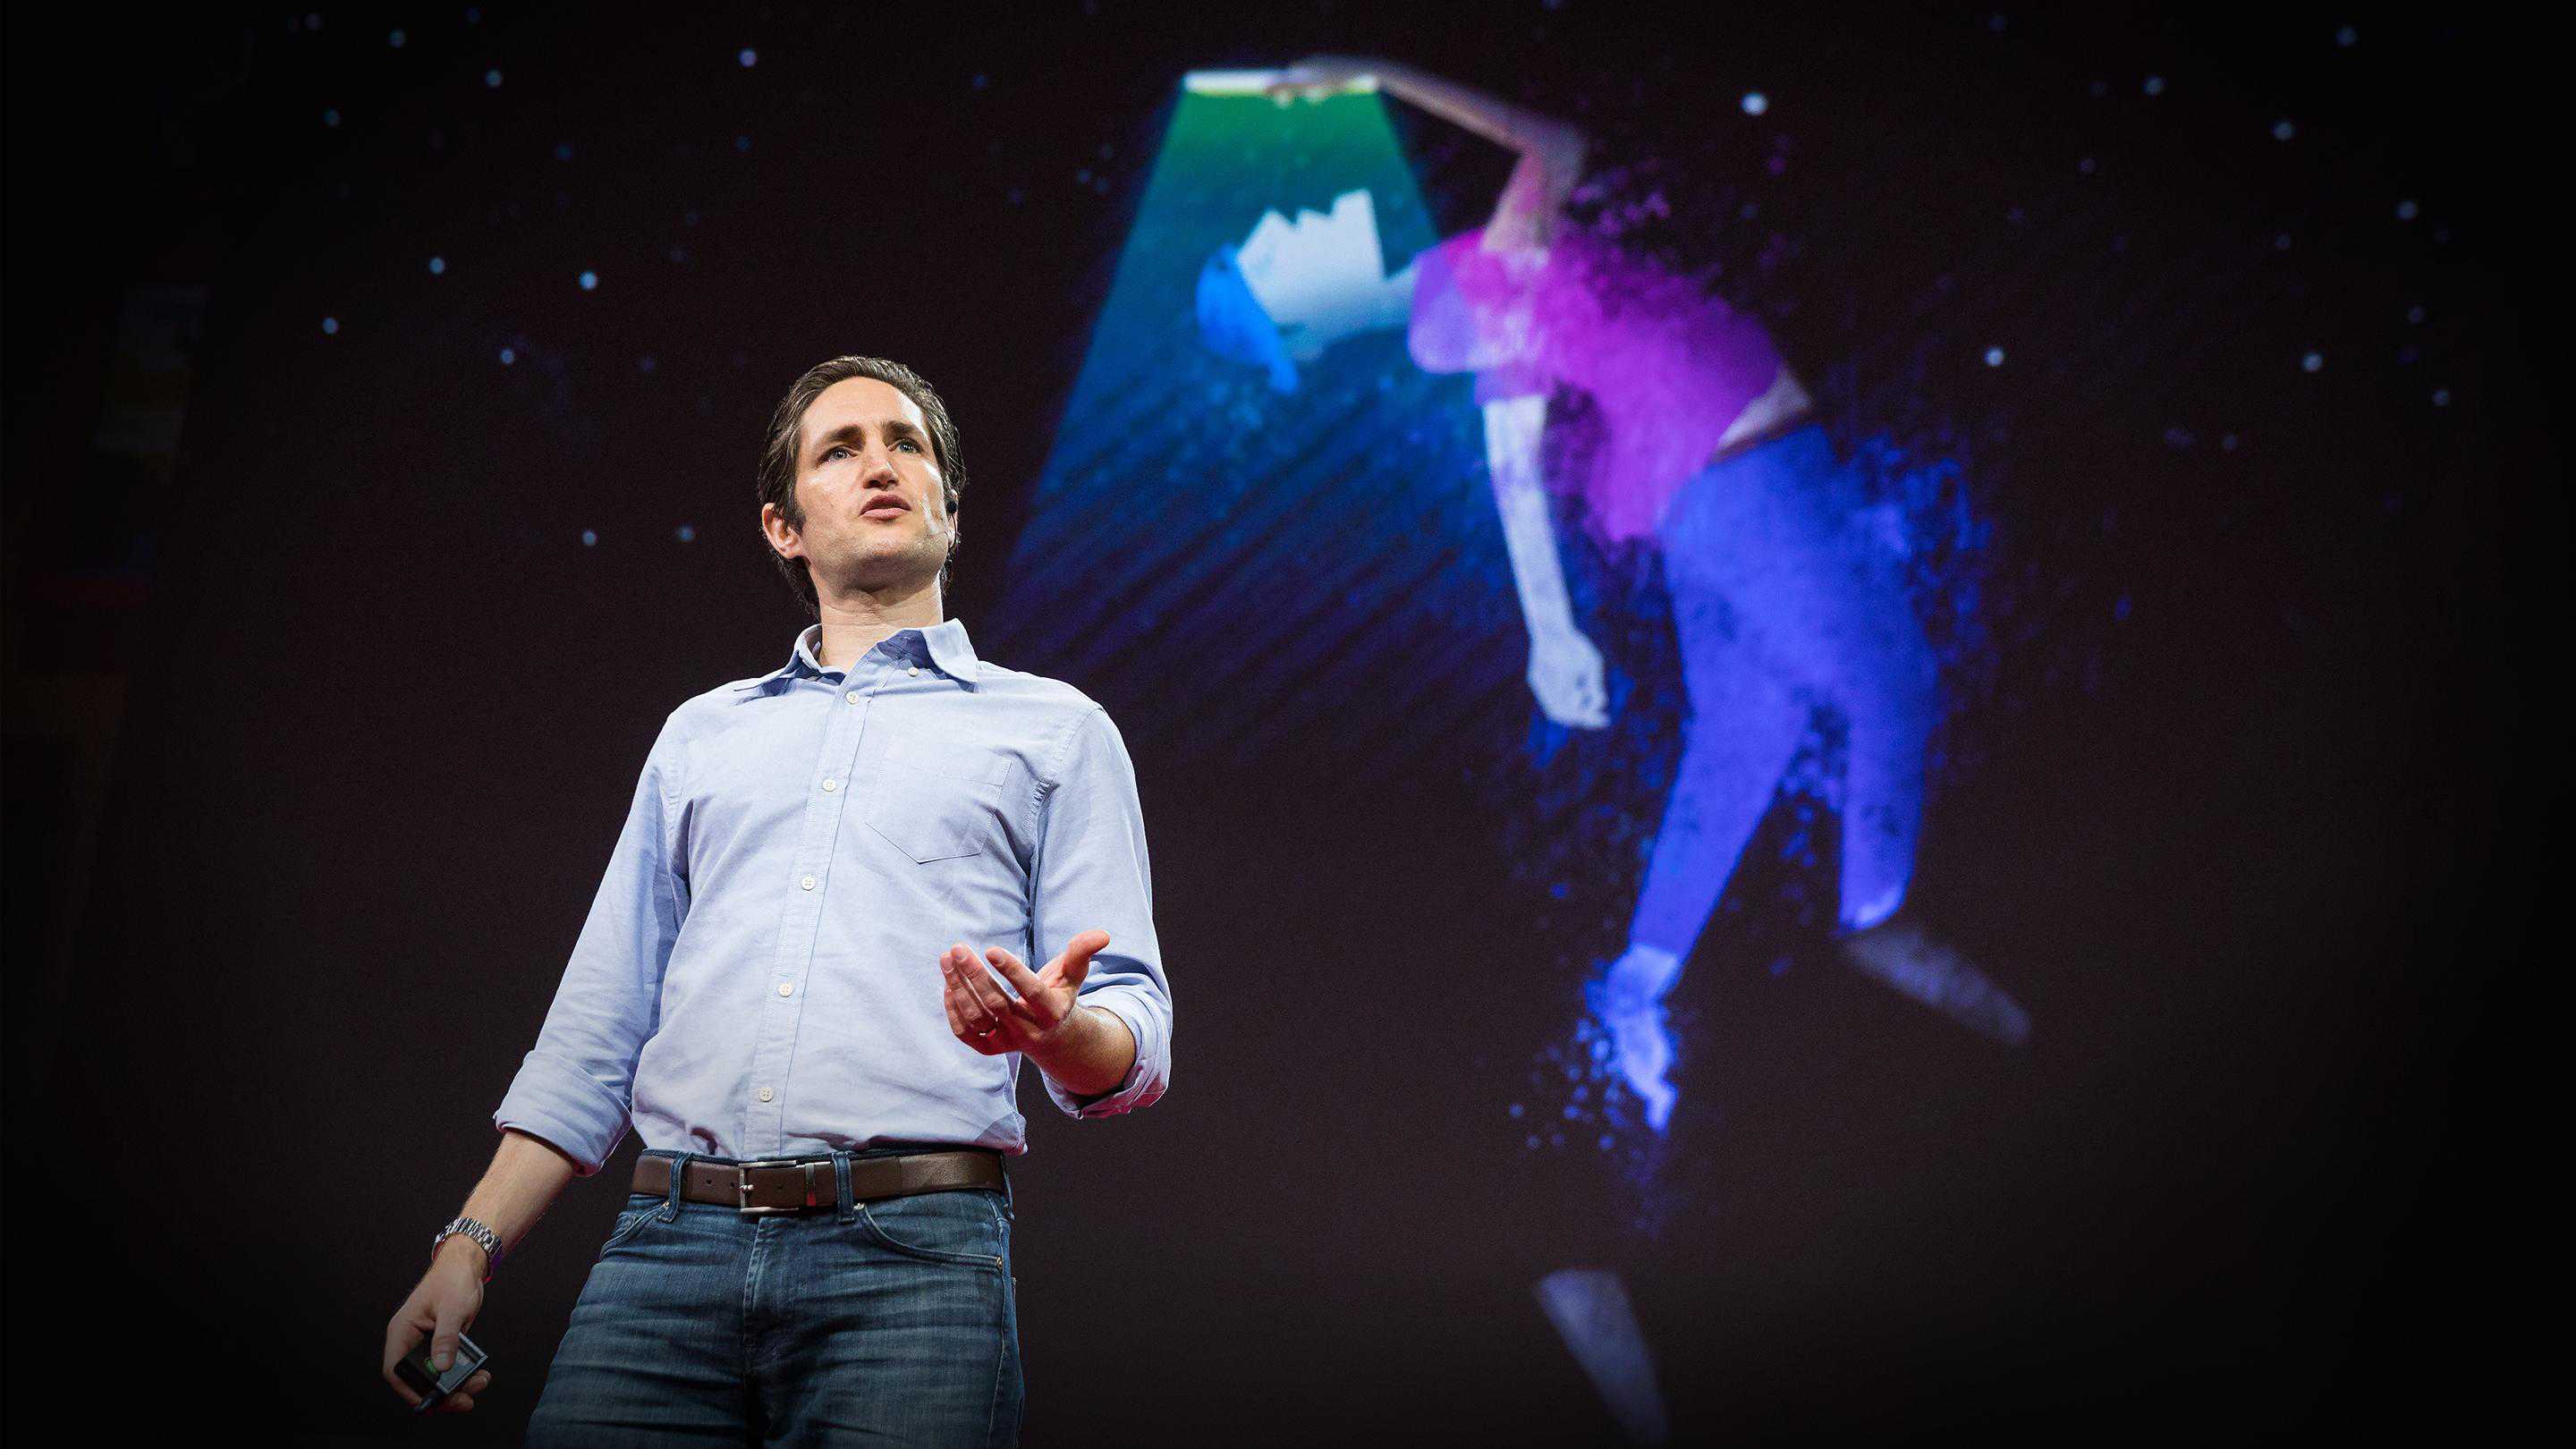 Adam Alter, a light-skinned man with dark hair, gives a talk at TED.